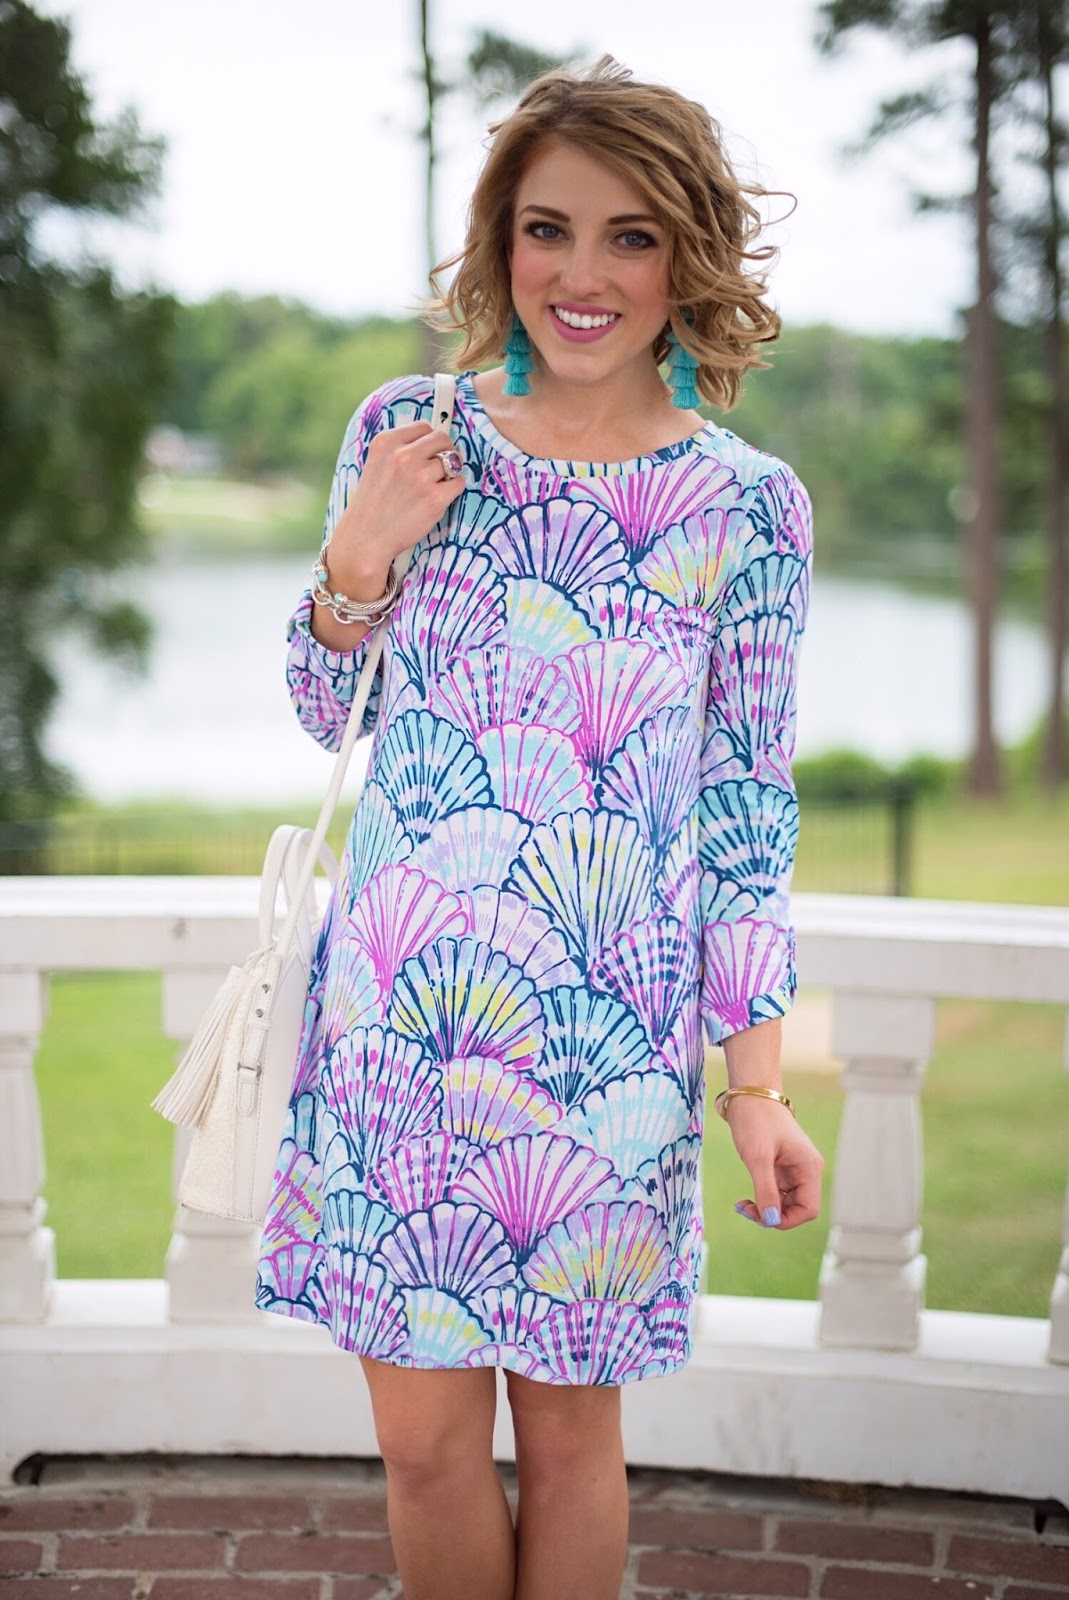 Lilly Pulitzer Oh Shello - Click through to see more on Something Delightful Blog.